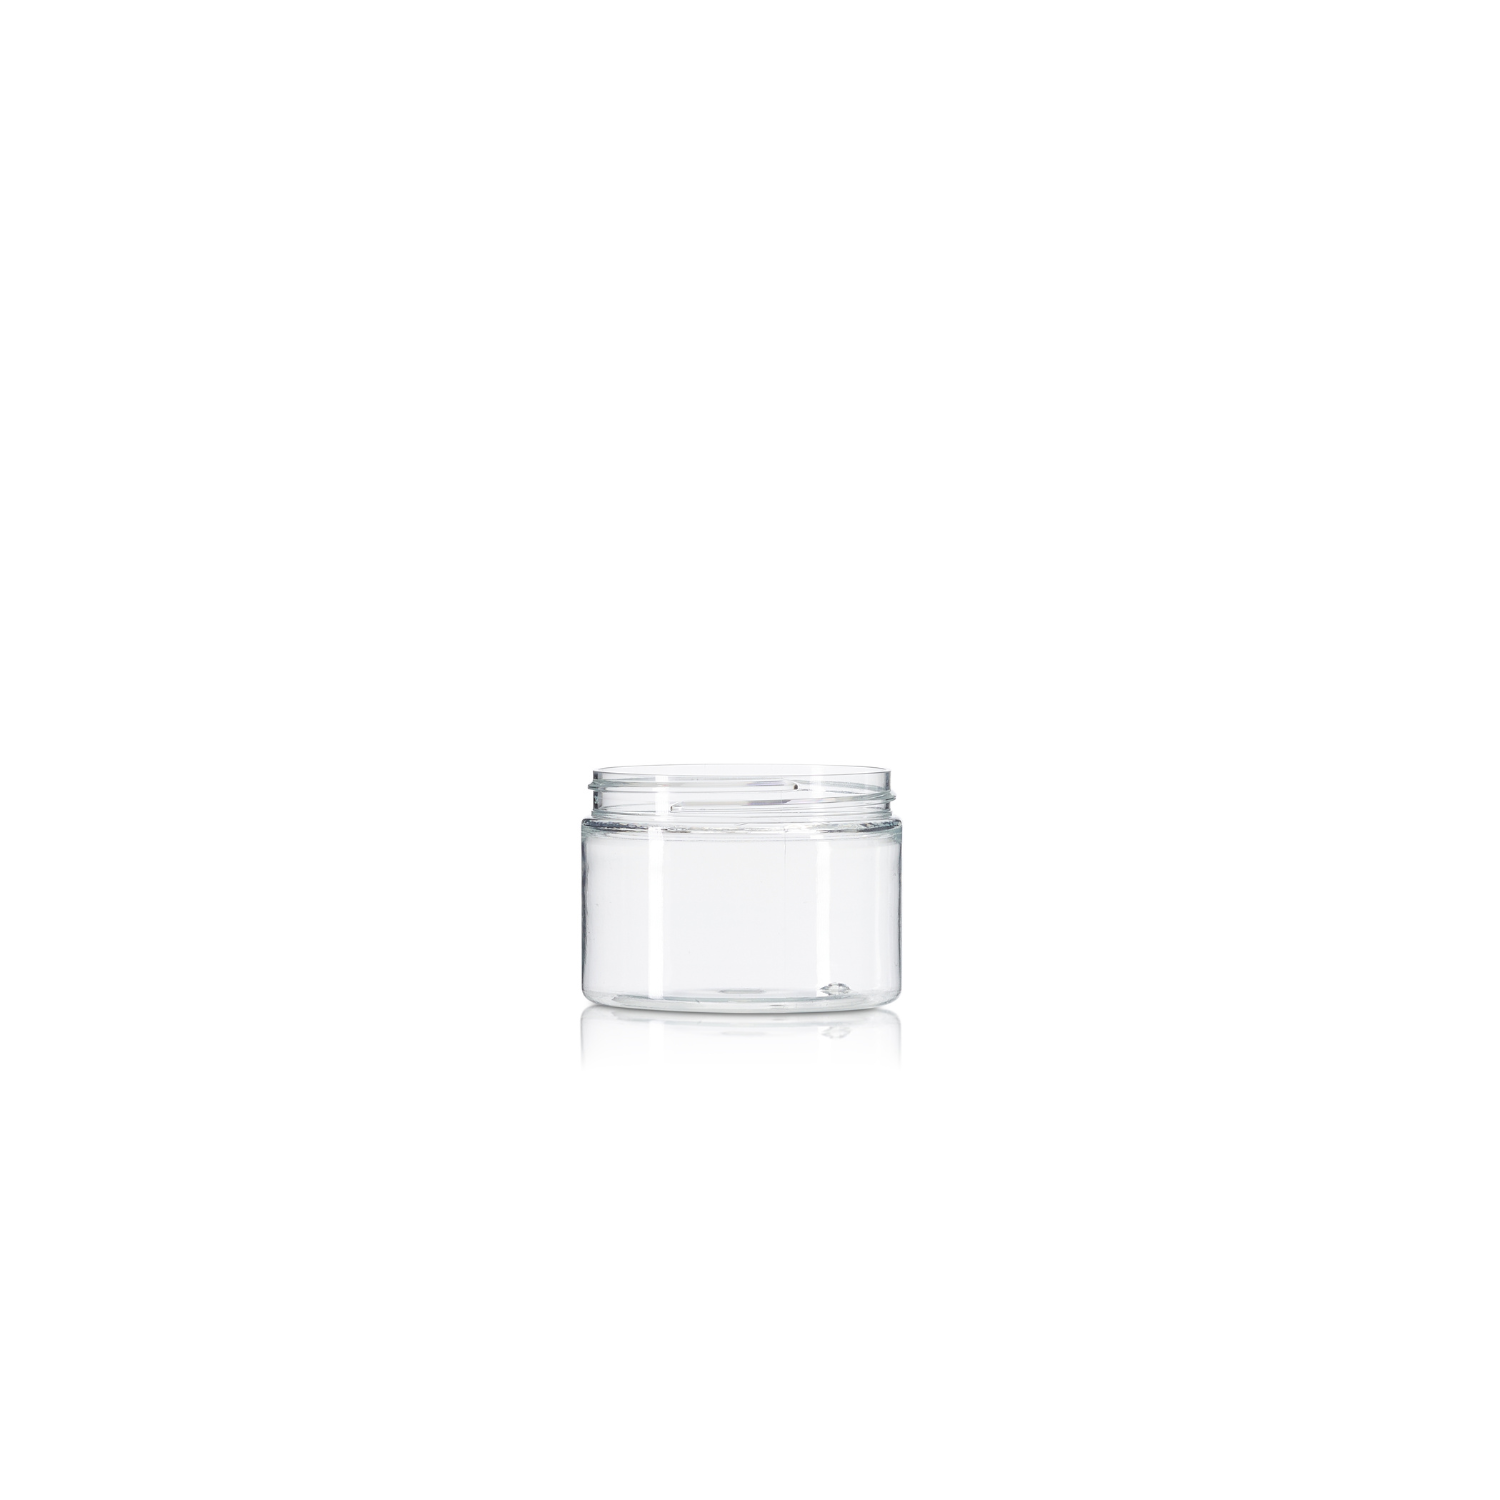 150ml Clear PET Straight-Sided Jar - 70/400 neck